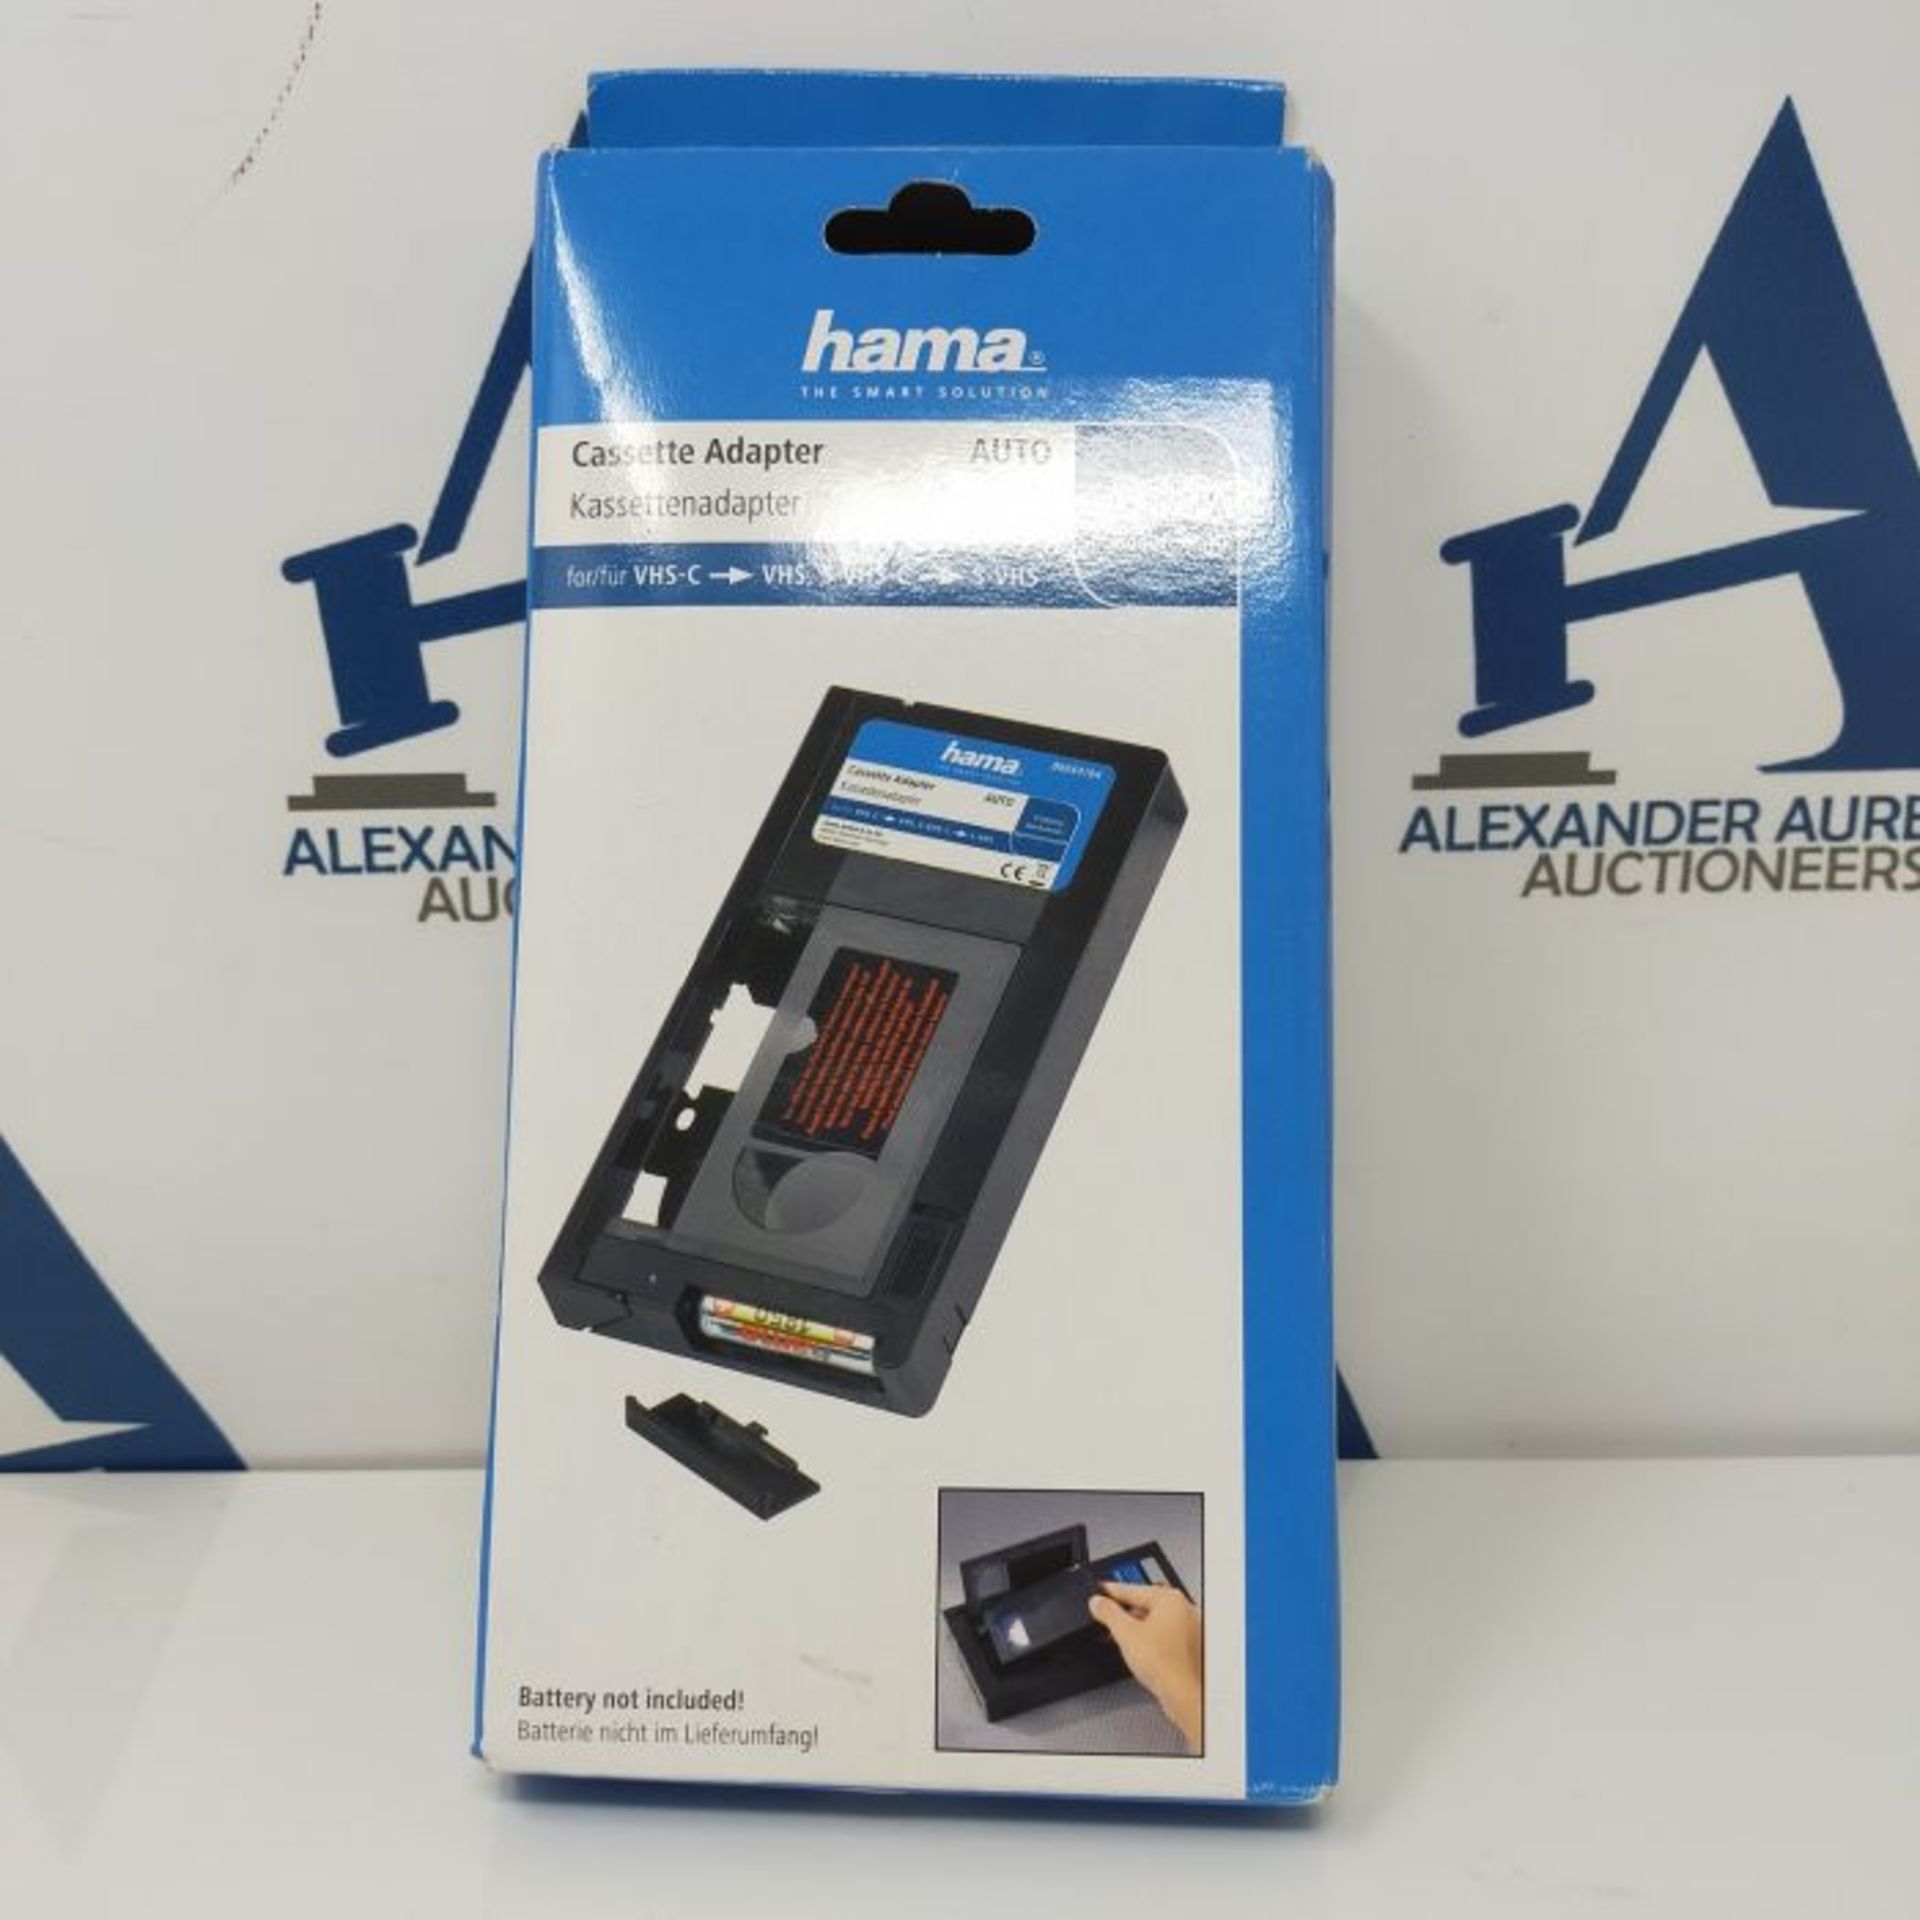 Hama VHS Cassette Adapter for VHS-C Video Cassettes (automatic, battery operated), Bla - Image 3 of 3